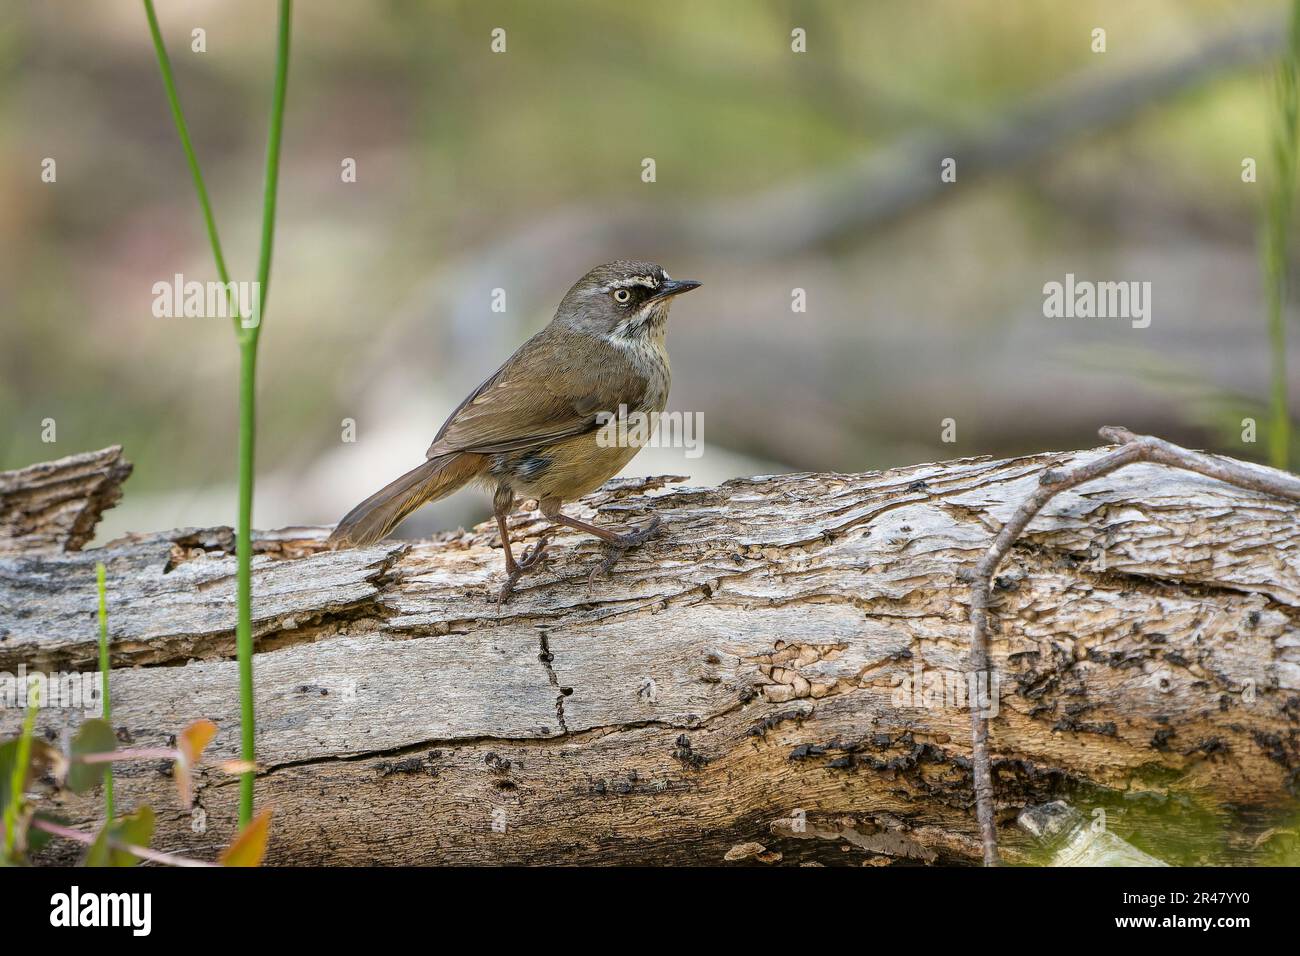 A small white-browed Scrubwren bird perched on a wooden log in a forest setting Stock Photo